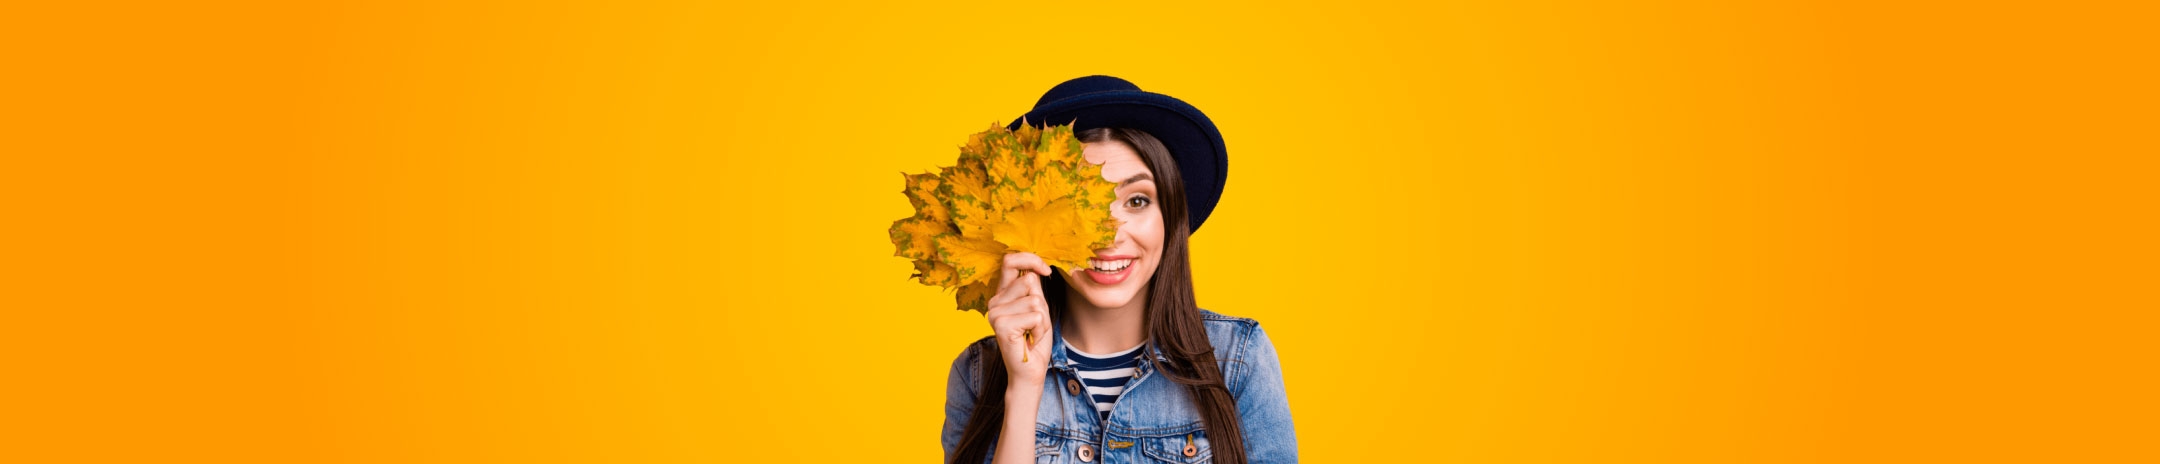 A woman in a striped shirt, black hat and jean jacket, holding up fall leaves in front of a gradient orange background.